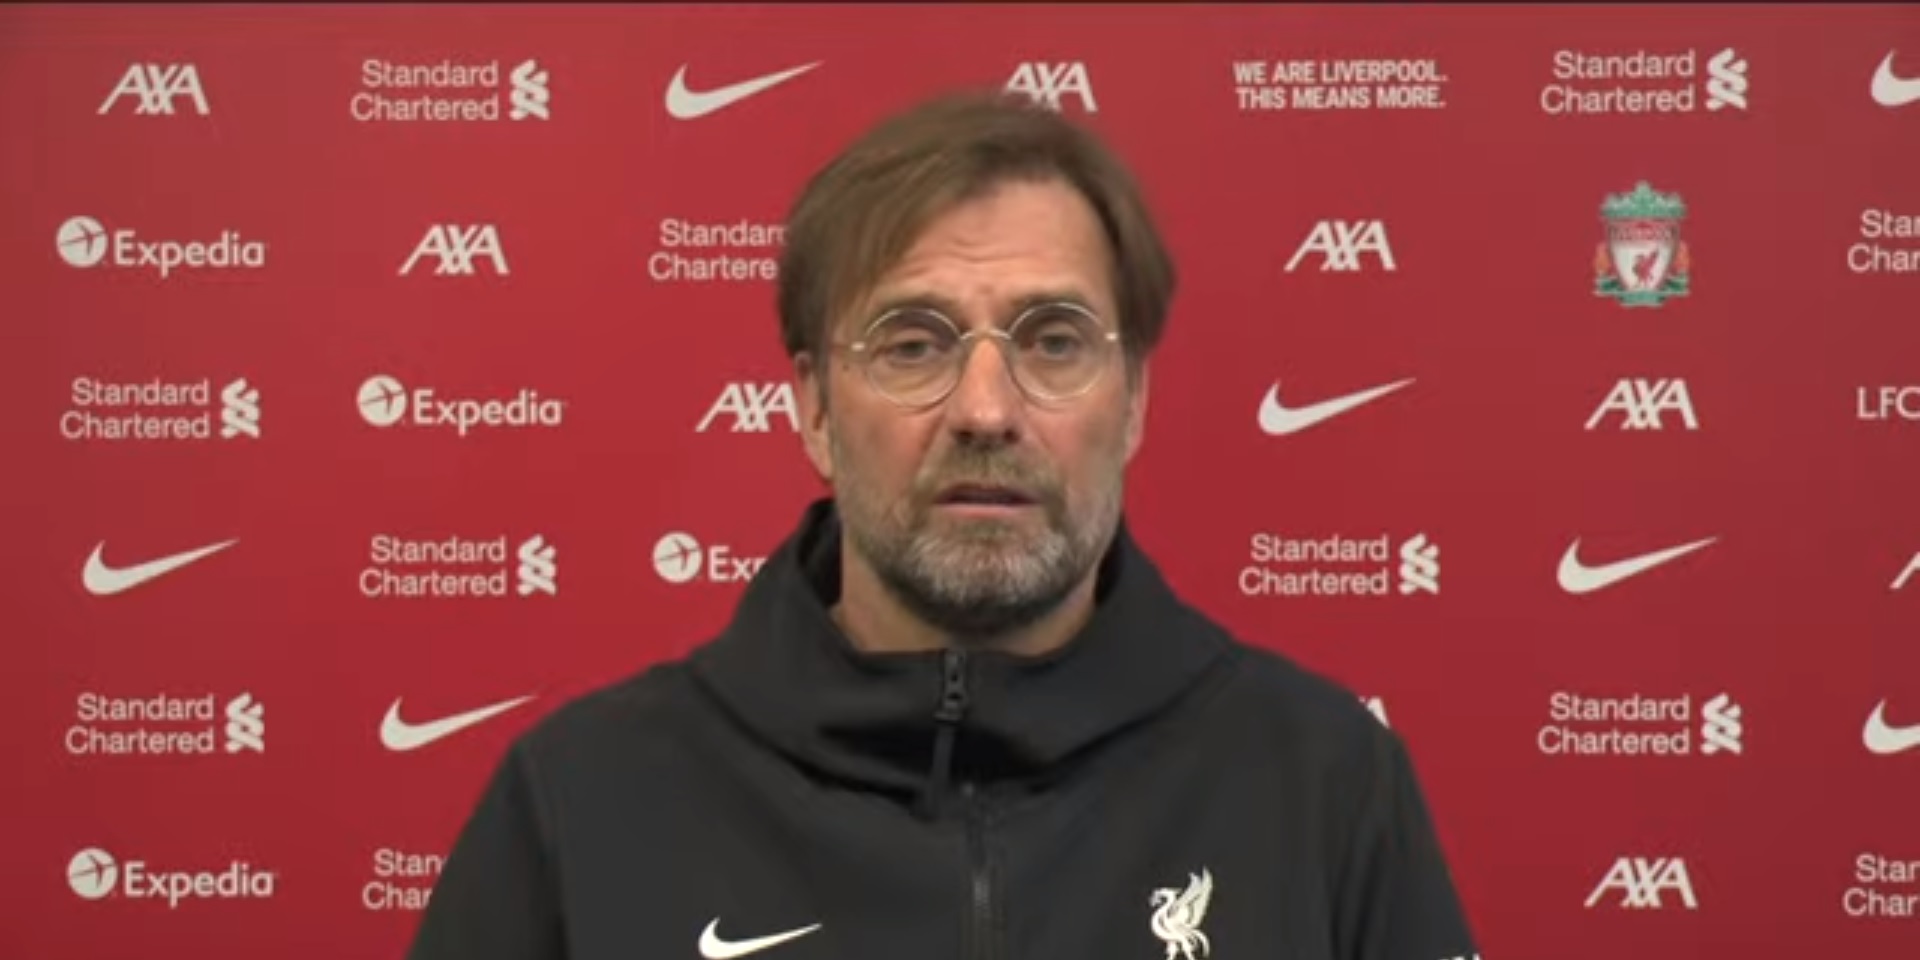 Klopp issues plea for social media companies to take action against online abuse & racism